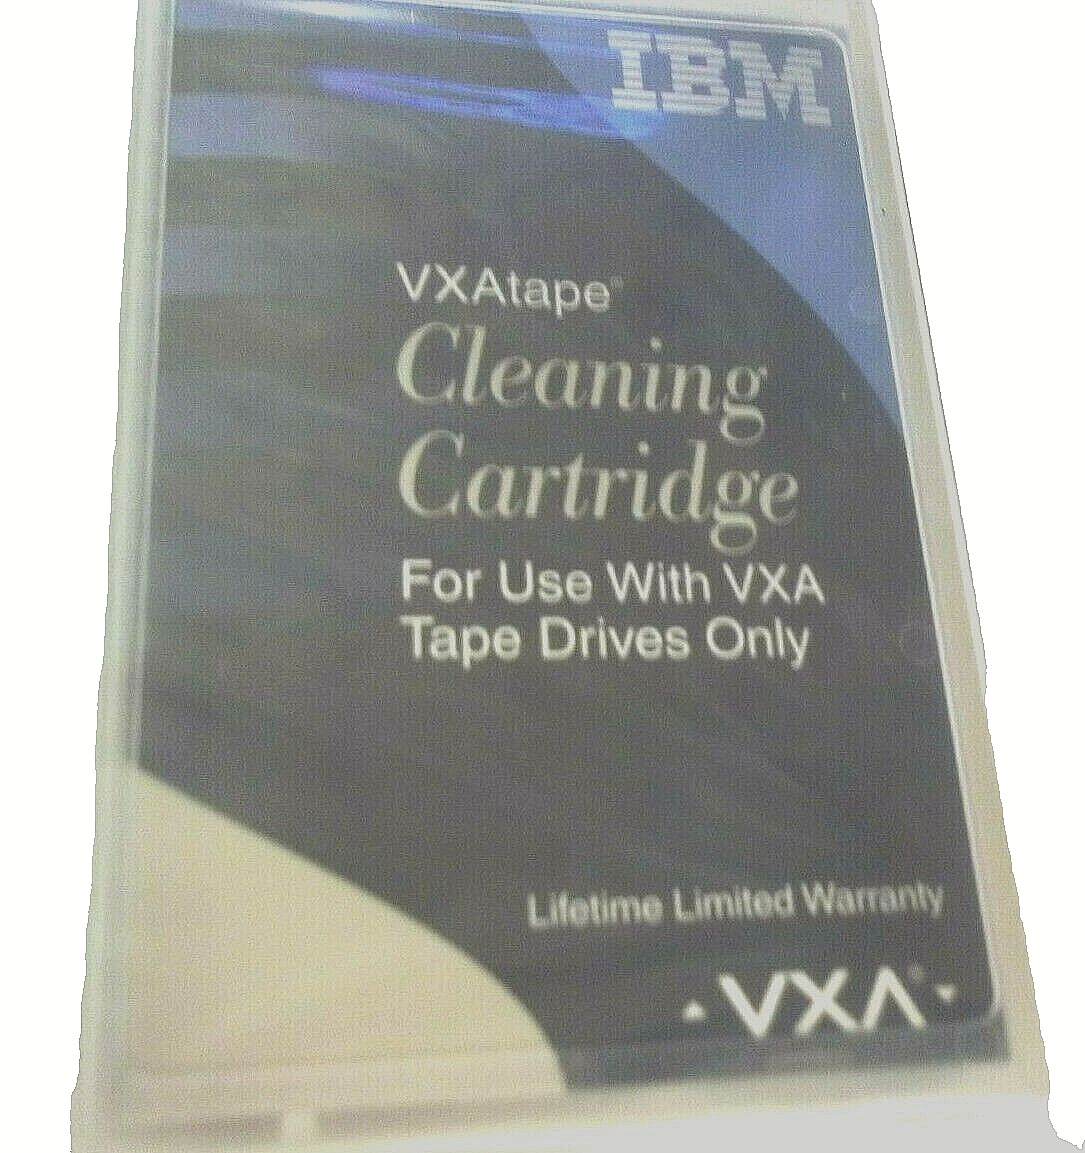 IBM VXAtape Cleaning Cartridge for Use with VXA Tape Drives Only